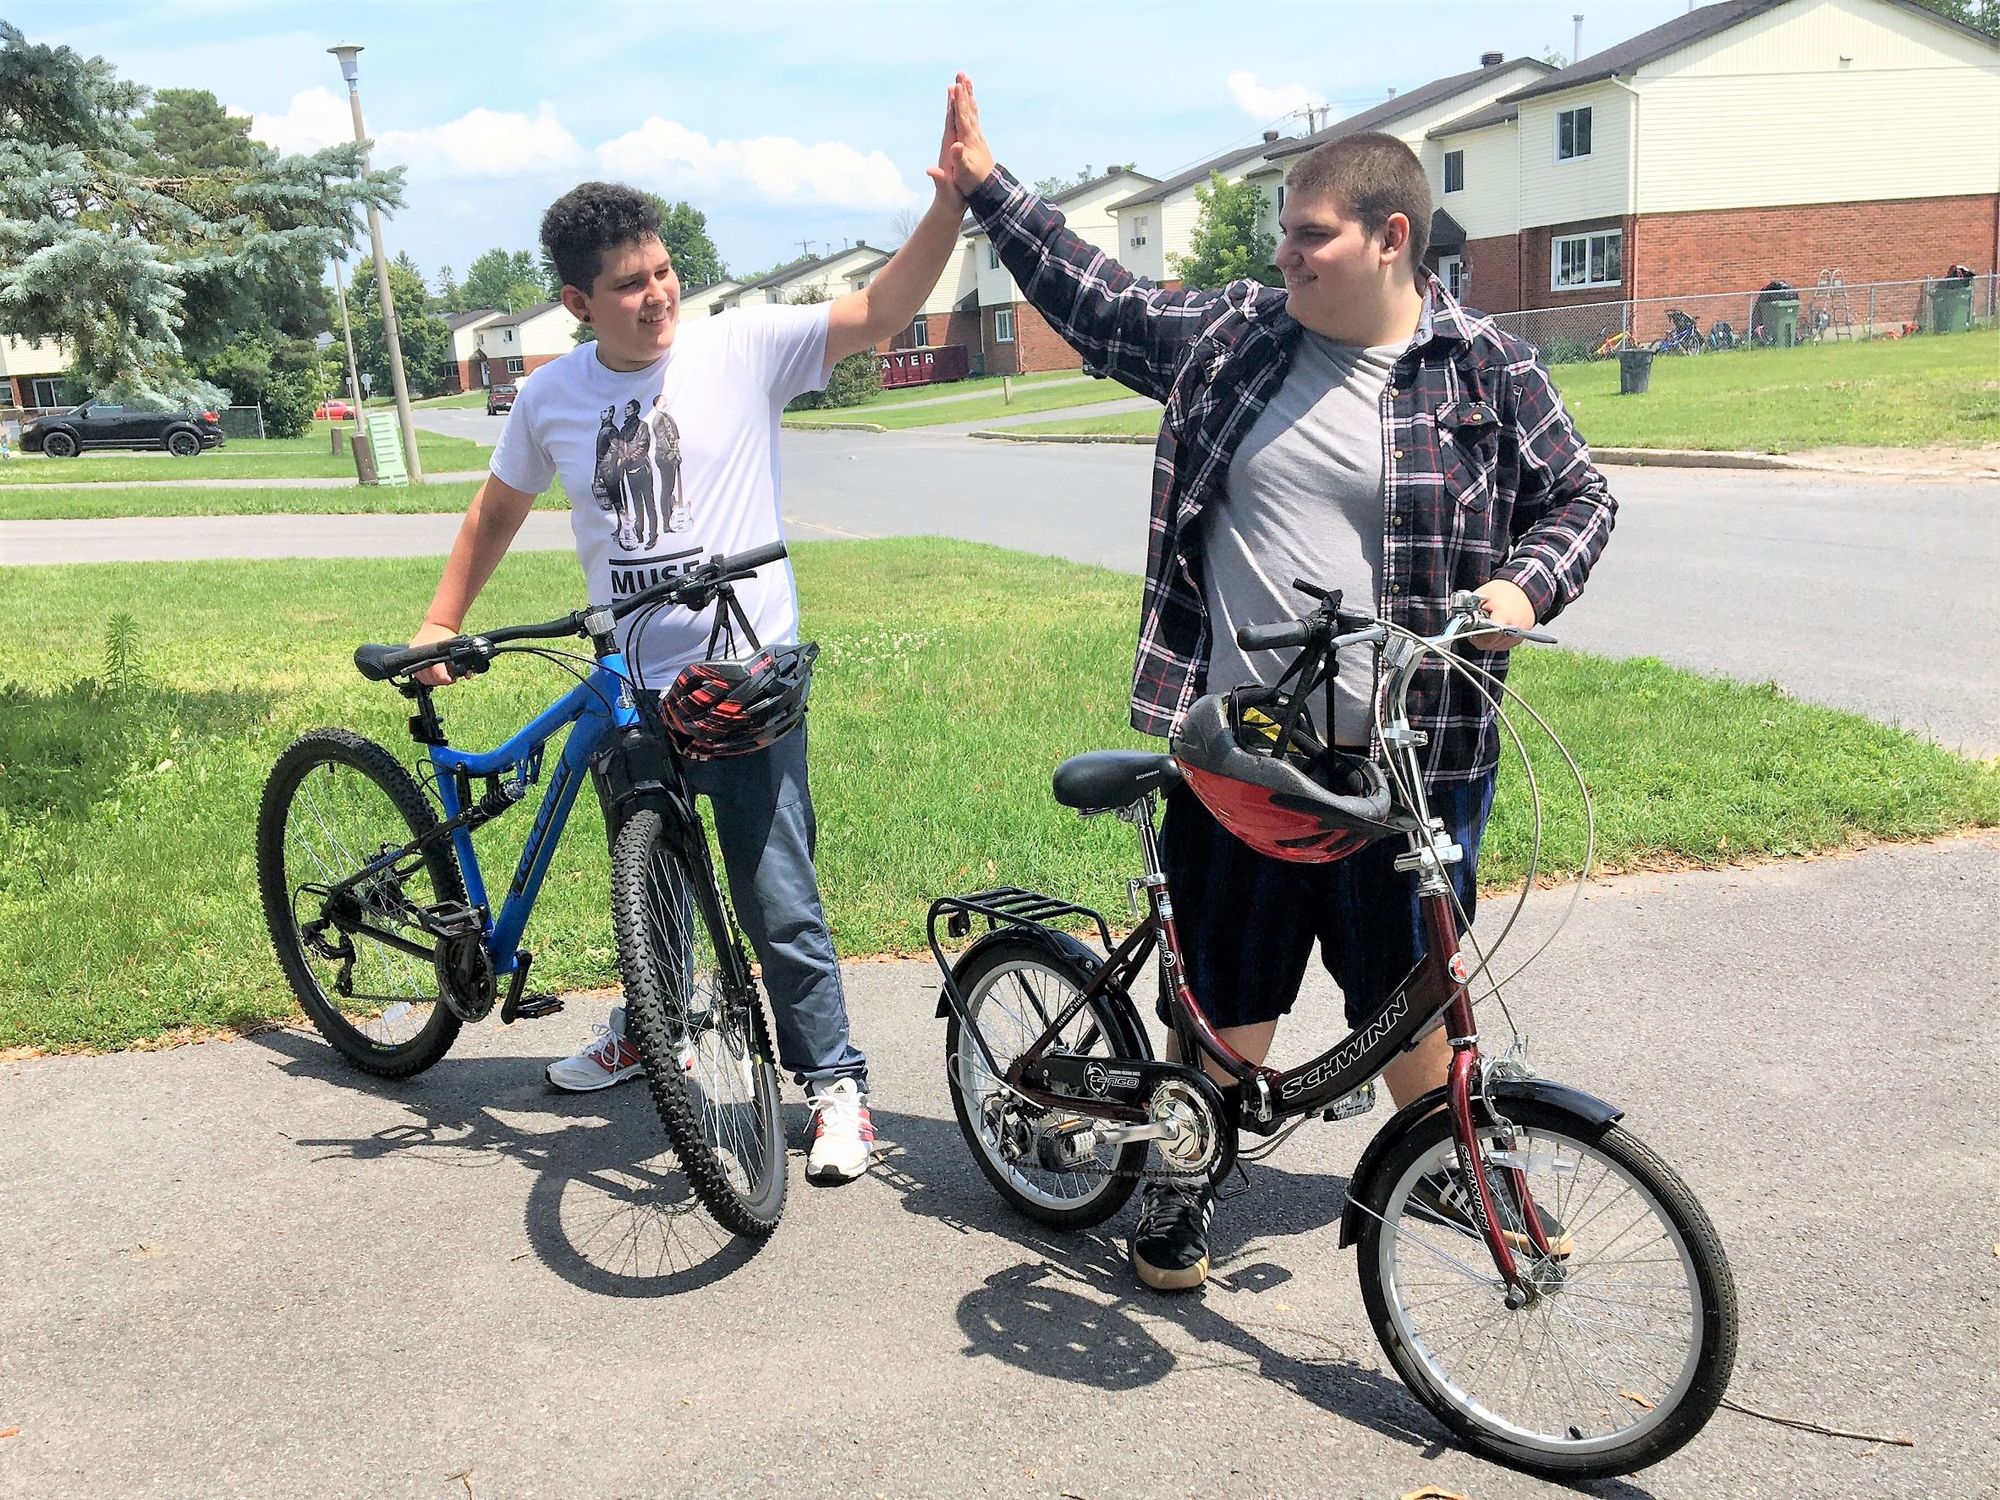 Hawkesbury youth’s stolen bicycle replaced by the generosity of strangers